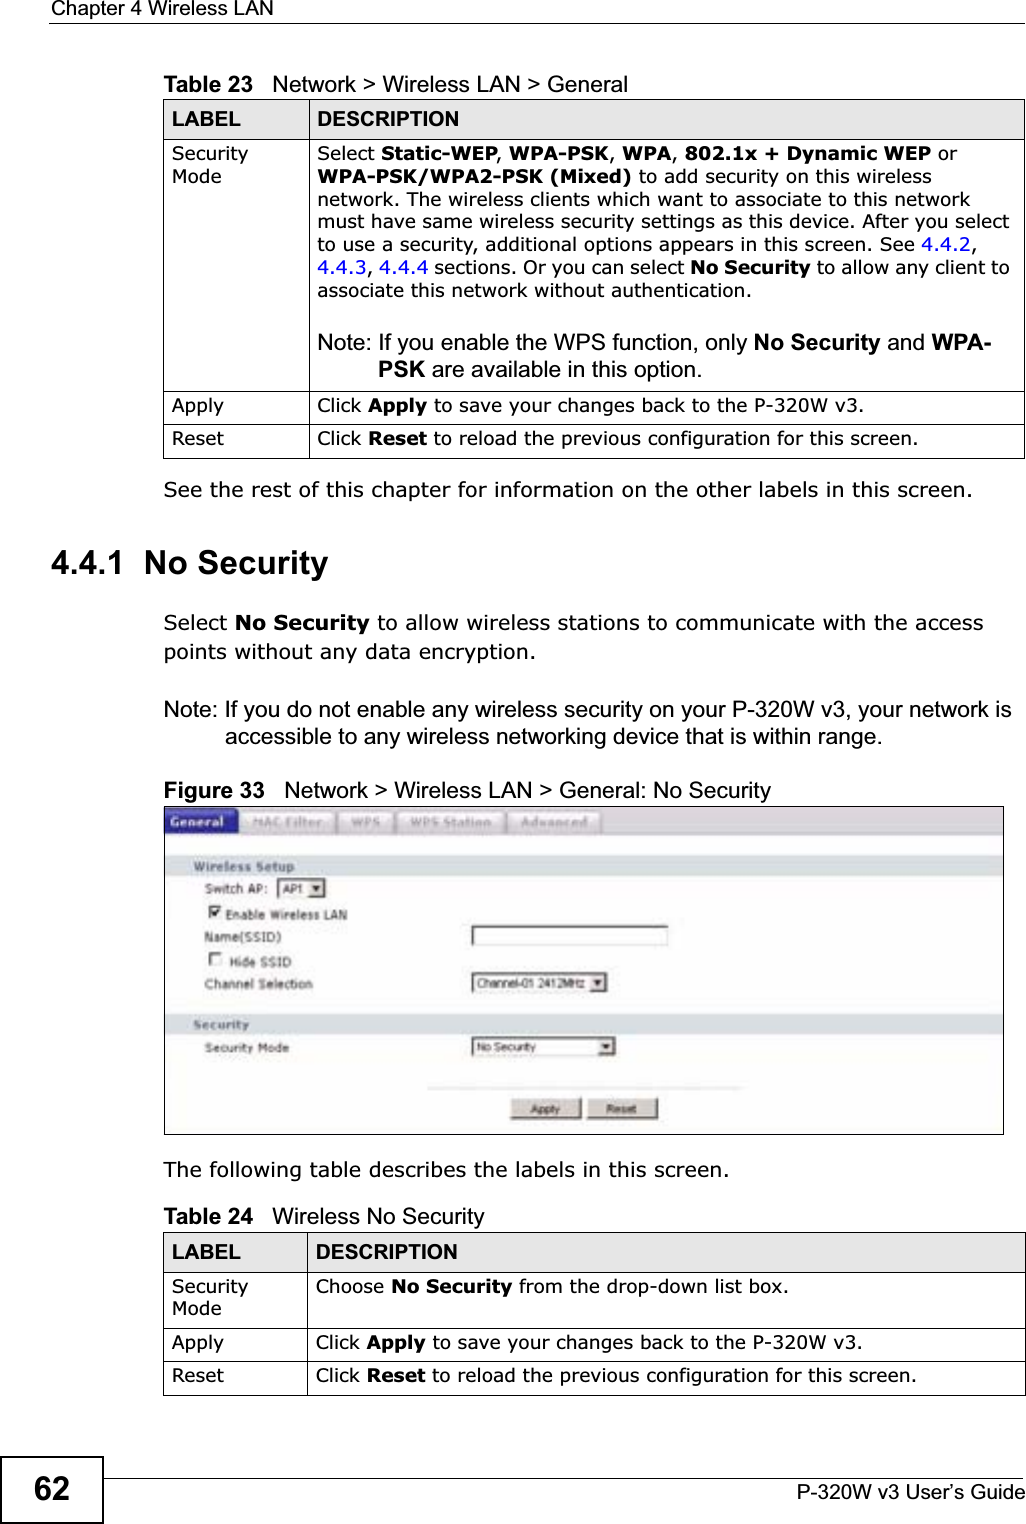 Chapter 4 Wireless LANP-320W v3 User’s Guide62See the rest of this chapter for information on the other labels in this screen. 4.4.1  No SecuritySelect No Security to allow wireless stations to communicate with the access points without any data encryption. Note: If you do not enable any wireless security on your P-320W v3, your network is accessible to any wireless networking device that is within range.Figure 33   Network &gt; Wireless LAN &gt; General: No SecurityThe following table describes the labels in this screen.Security ModeSelect Static-WEP,WPA-PSK,WPA,802.1x + Dynamic WEP or WPA-PSK/WPA2-PSK (Mixed) to add security on this wireless network. The wireless clients which want to associate to this network must have same wireless security settings as this device. After you select to use a security, additional options appears in this screen. See 4.4.2,4.4.3,4.4.4 sections. Or you can select No Security to allow any client to associate this network without authentication.Note: If you enable the WPS function, only No Security and WPA-PSK are available in this option.Apply Click Apply to save your changes back to the P-320W v3.Reset Click Reset to reload the previous configuration for this screen.Table 23   Network &gt; Wireless LAN &gt; GeneralLABEL DESCRIPTIONTable 24   Wireless No SecurityLABEL DESCRIPTIONSecurity ModeChoose No Security from the drop-down list box.Apply Click Apply to save your changes back to the P-320W v3.Reset Click Reset to reload the previous configuration for this screen.